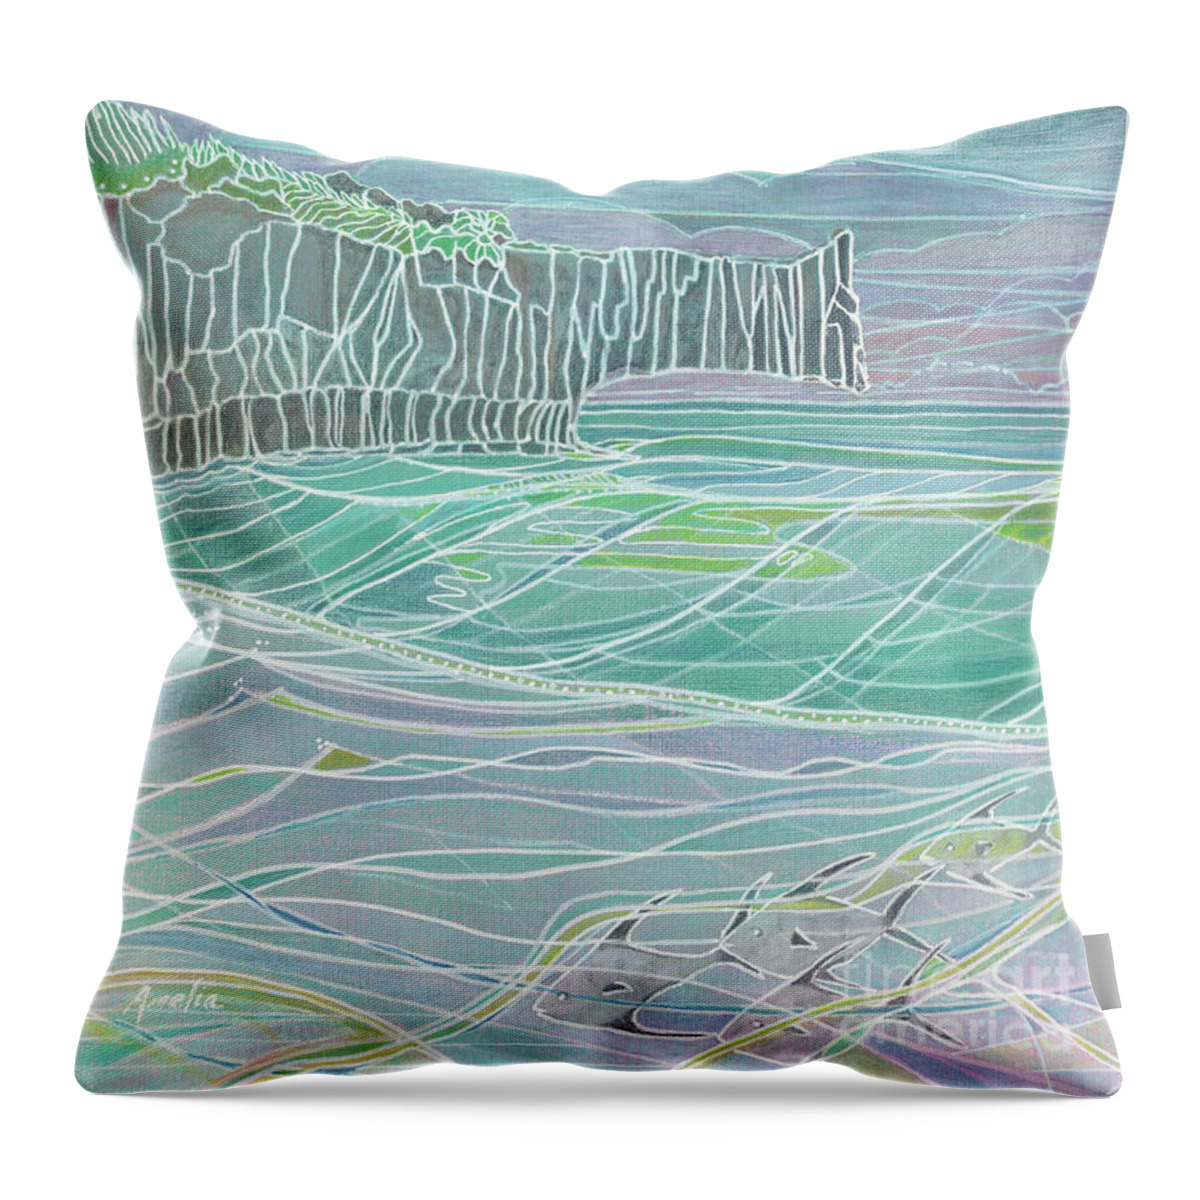 Ocean Throw Pillow featuring the painting Man-O-War Point by Amelia Stephenson at Ameliaworks